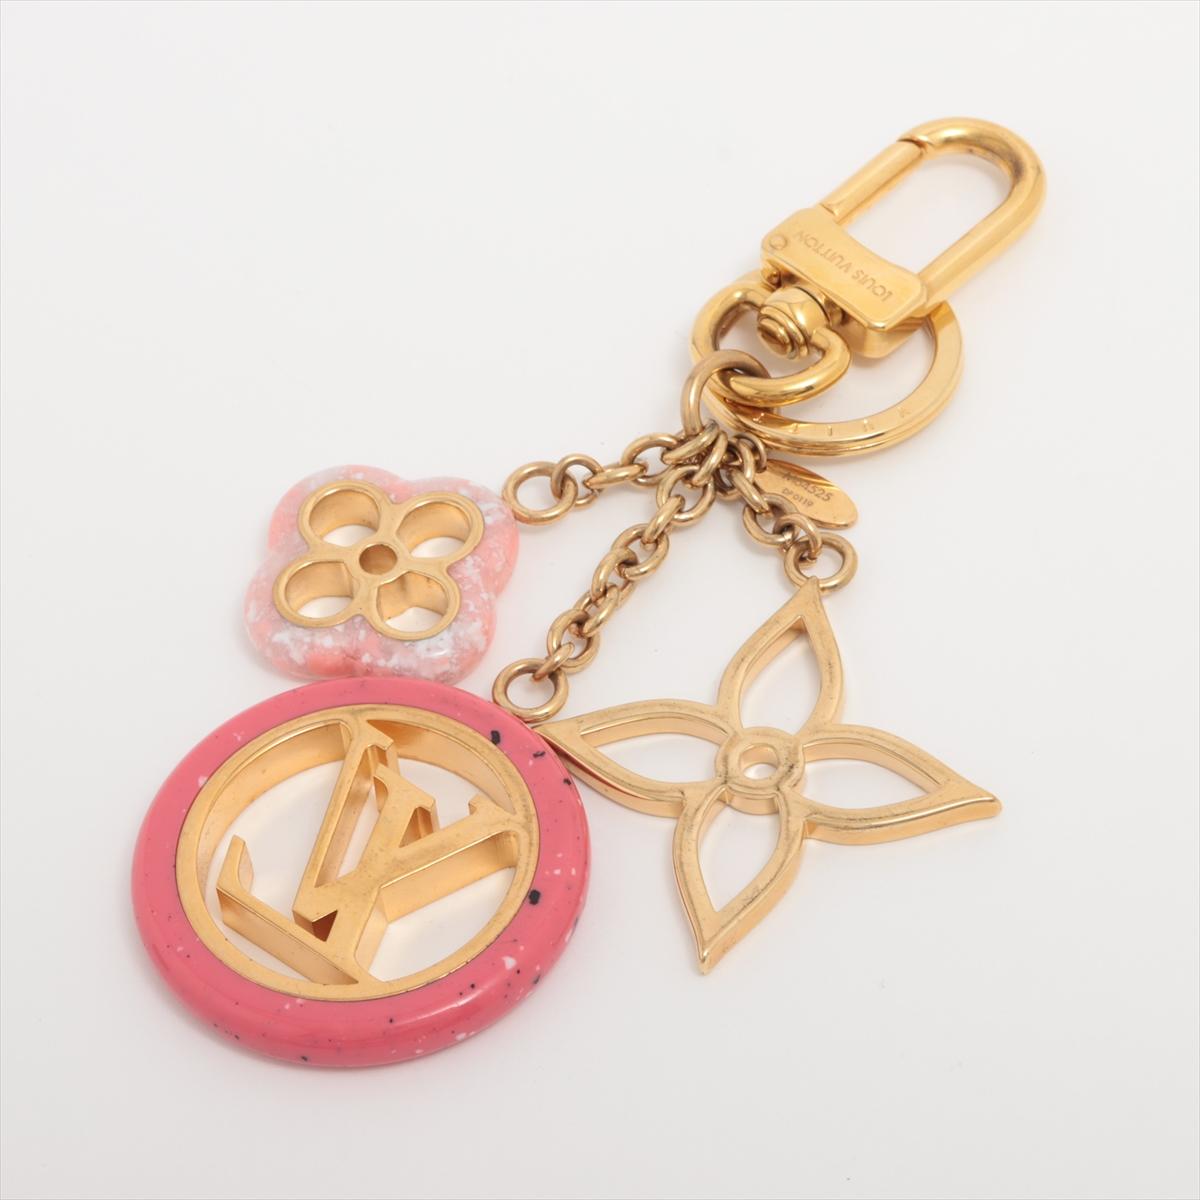 Louis Vuitton Colorline Bag Charm In Good Condition For Sale In Indianapolis, IN